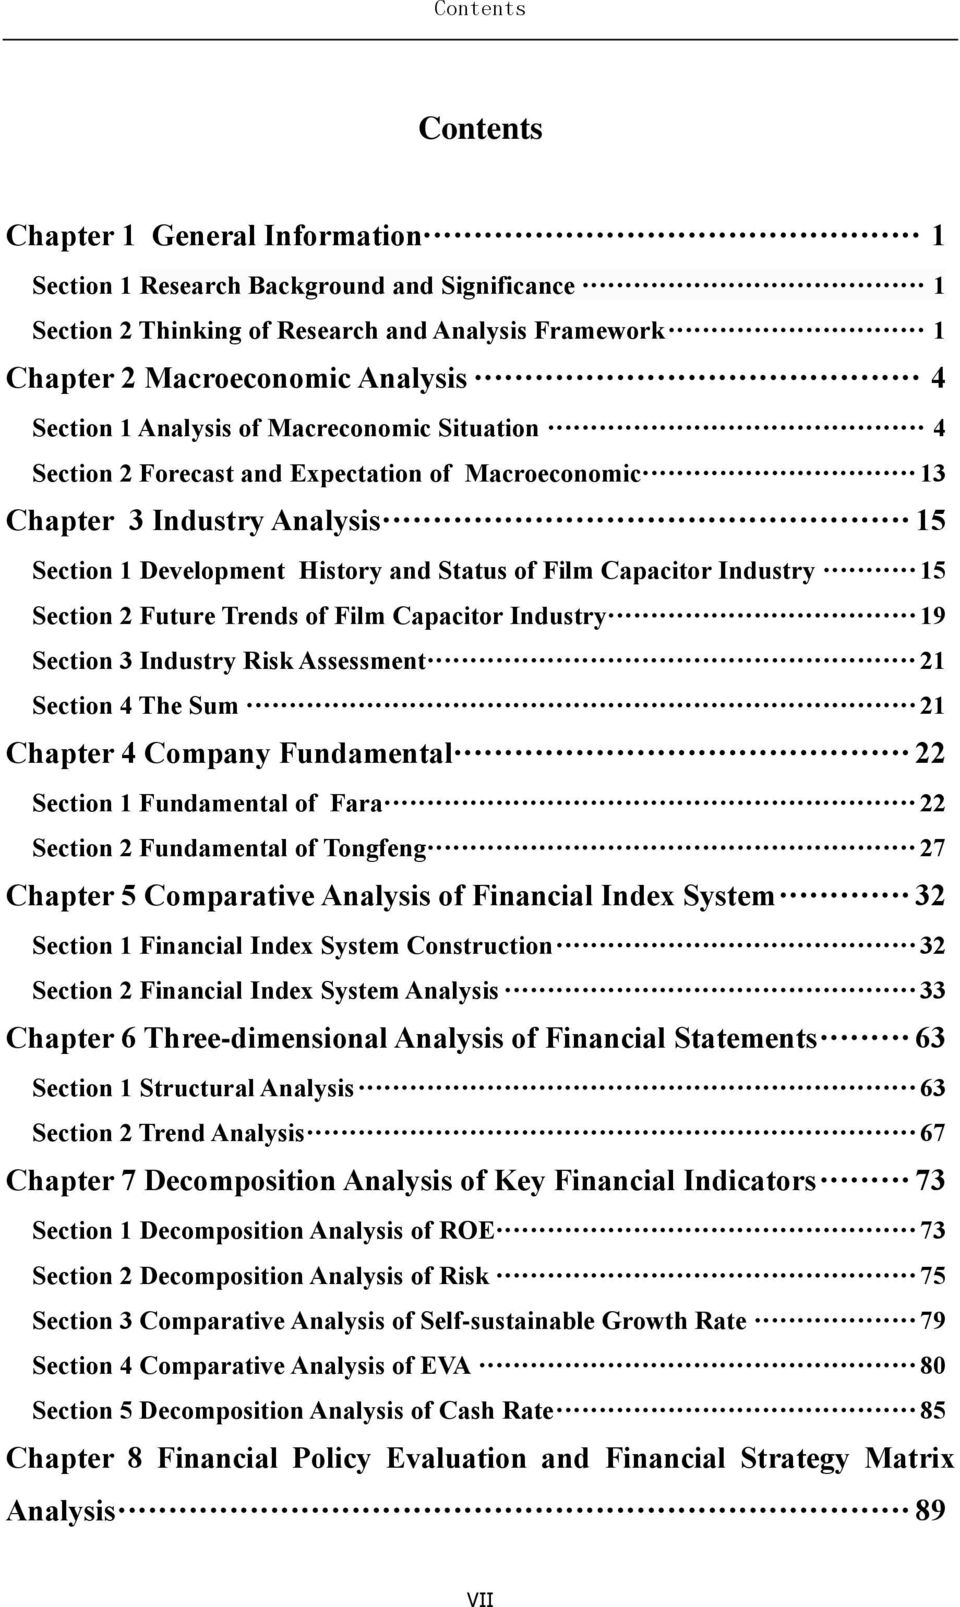 Section 2 Future Trends of Film Capacitor Industry 19 Section 3 Industry Risk Assessment 21 Section 4 The Sum 21 Chapter 4 Company Fundamental 22 Section 1 Fundamental of Fara 22 Section 2